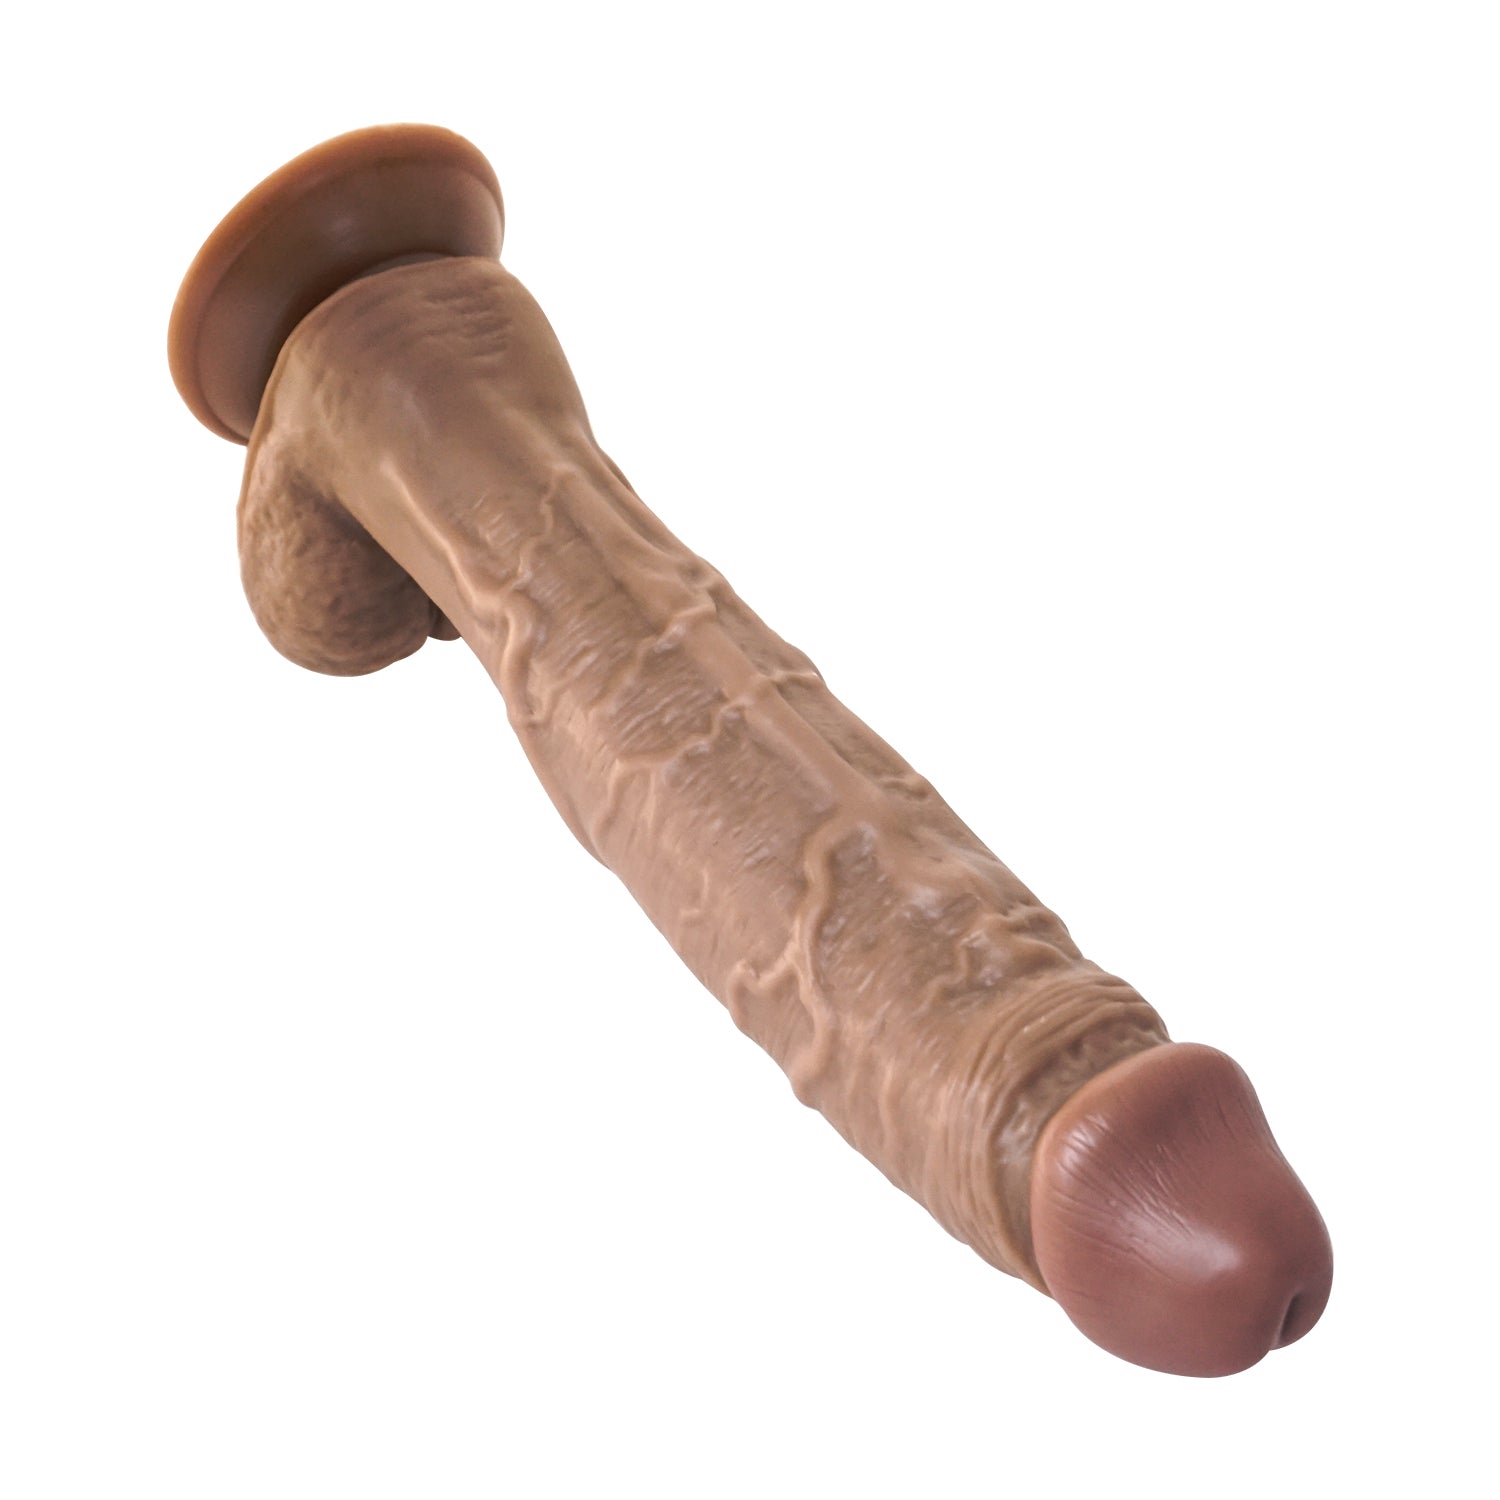 MD 29cm X-Large Realistic Dildo with Suction Cup - Brown